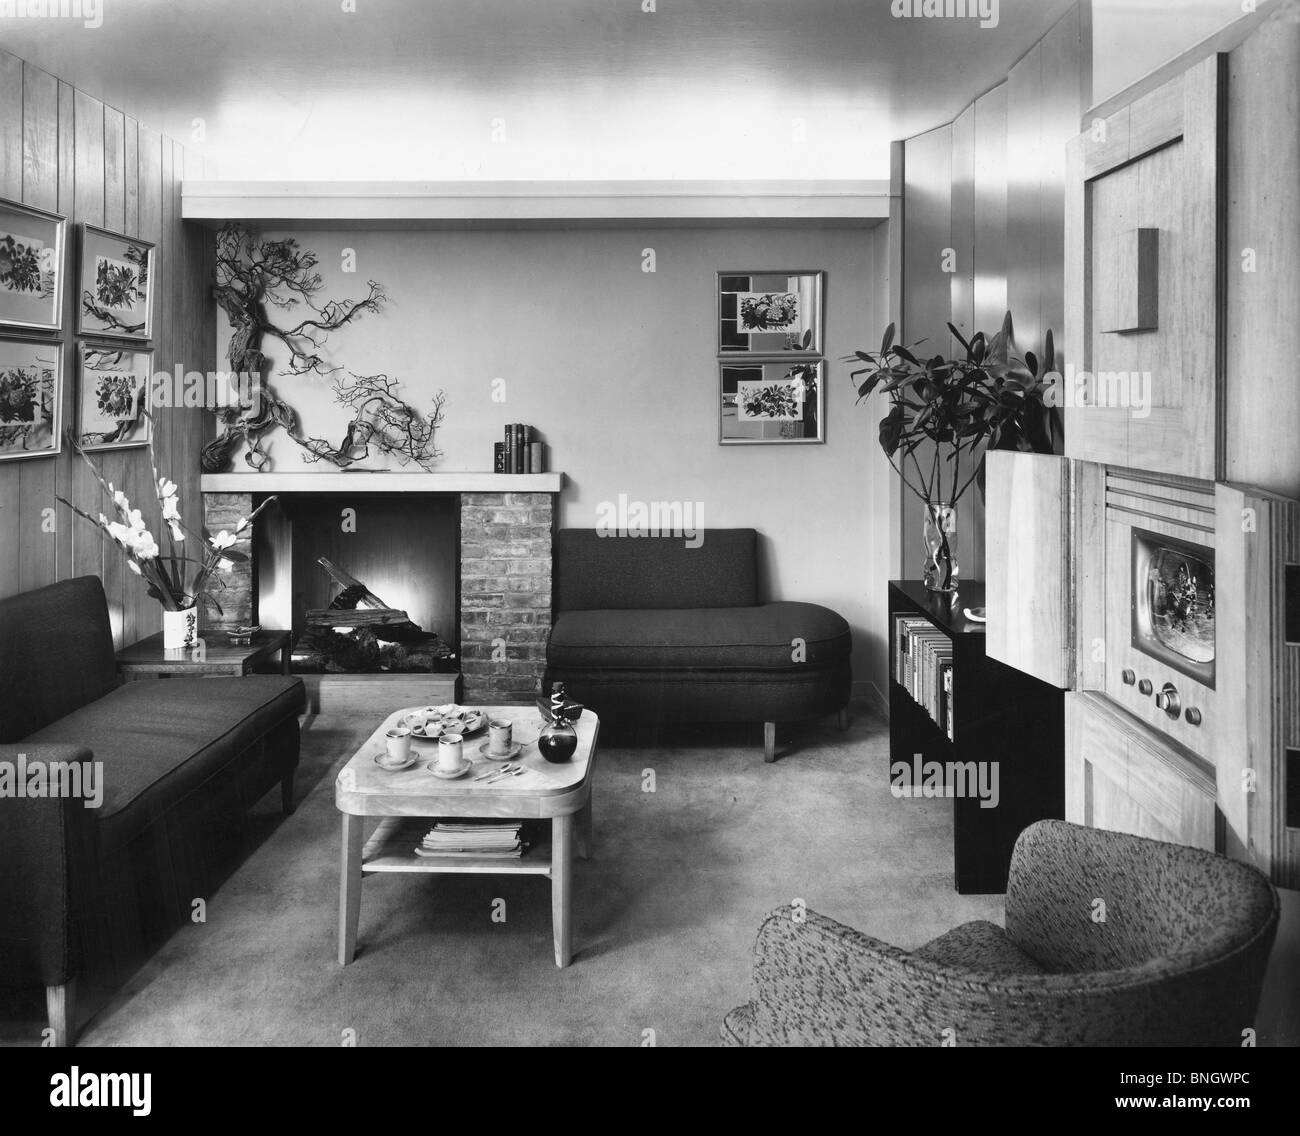 Interior of living room, 1950s style Stock Photo